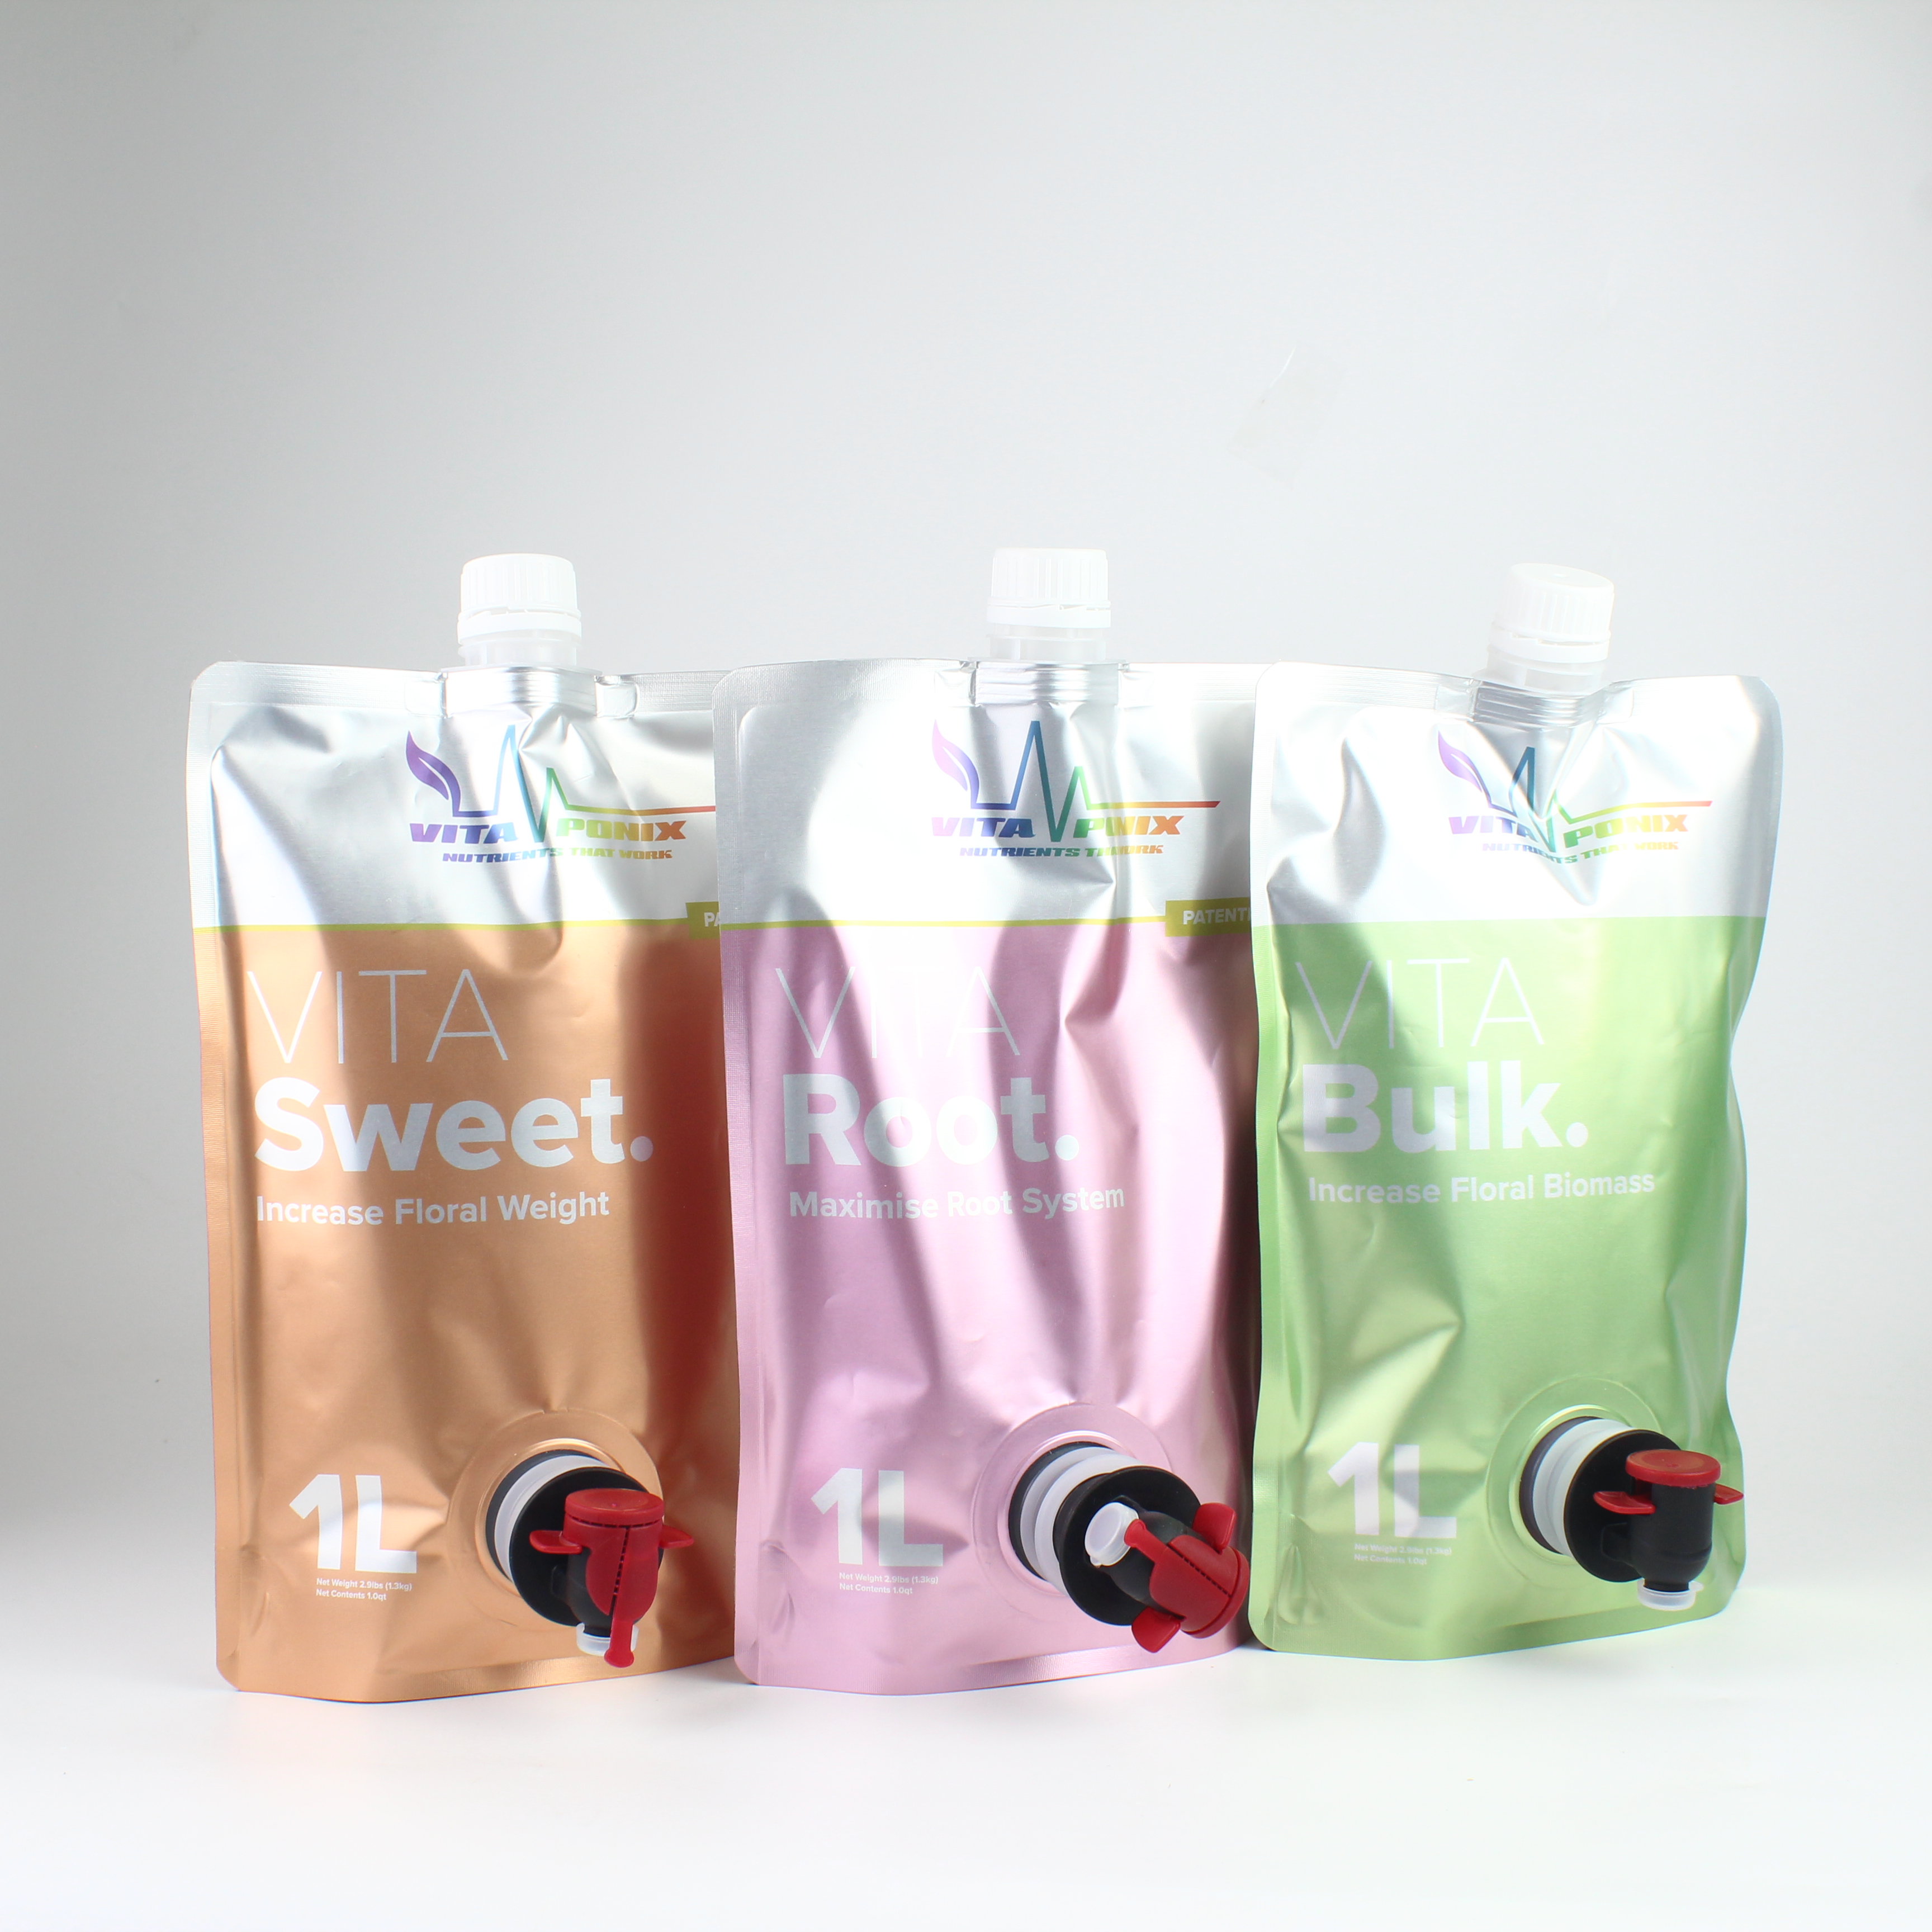 1L Custom Printed Spouted Stand Up Bag Barrel Pouch Liquid Packaging with Spigot Featured Image